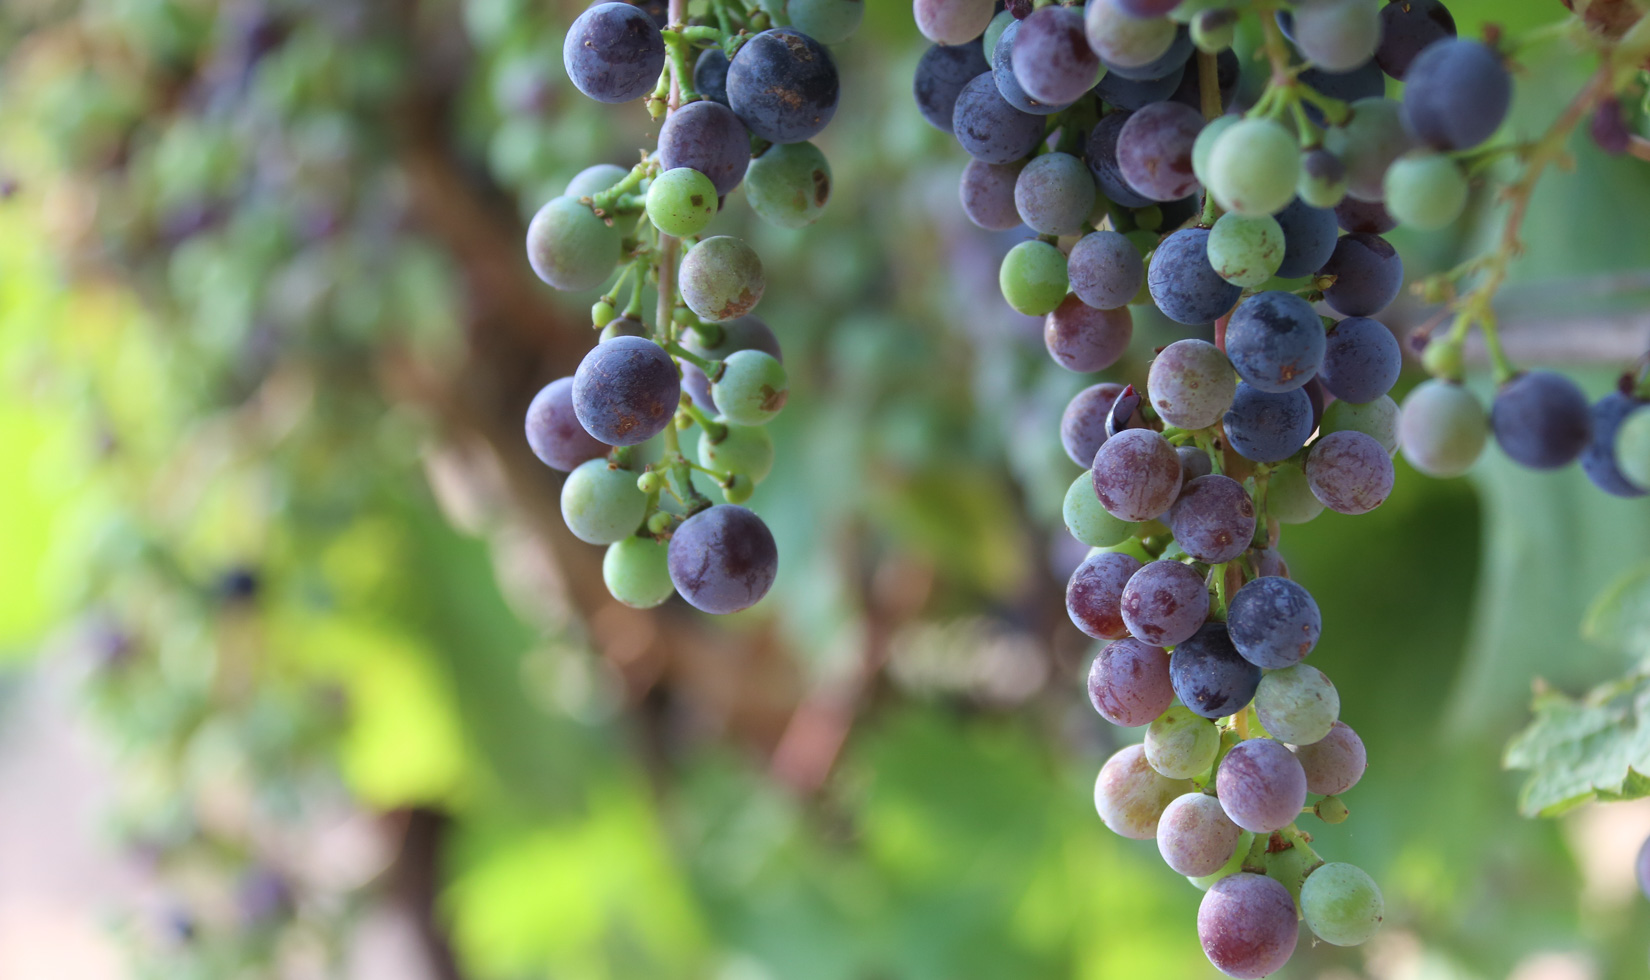 Extreme close-up of shades of green, red, and purple grapes on 2 clusters.